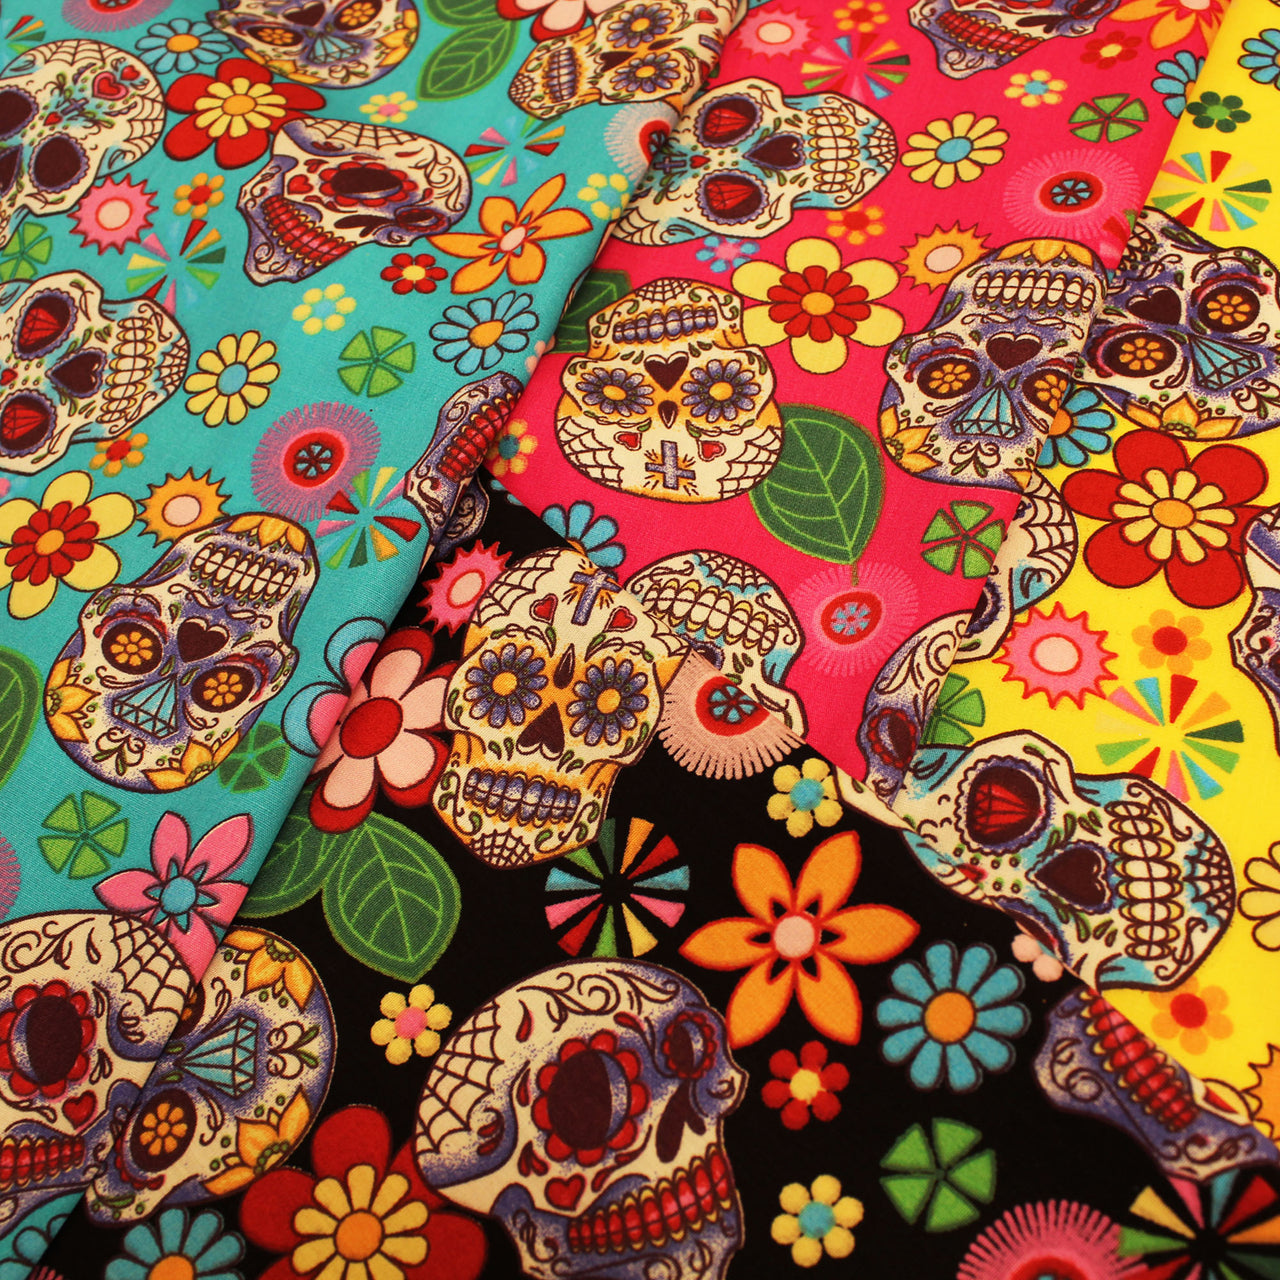 100% Cotton Poplin Fabric with Sugar Skulls - Mexican Day of the Dead - Halloween